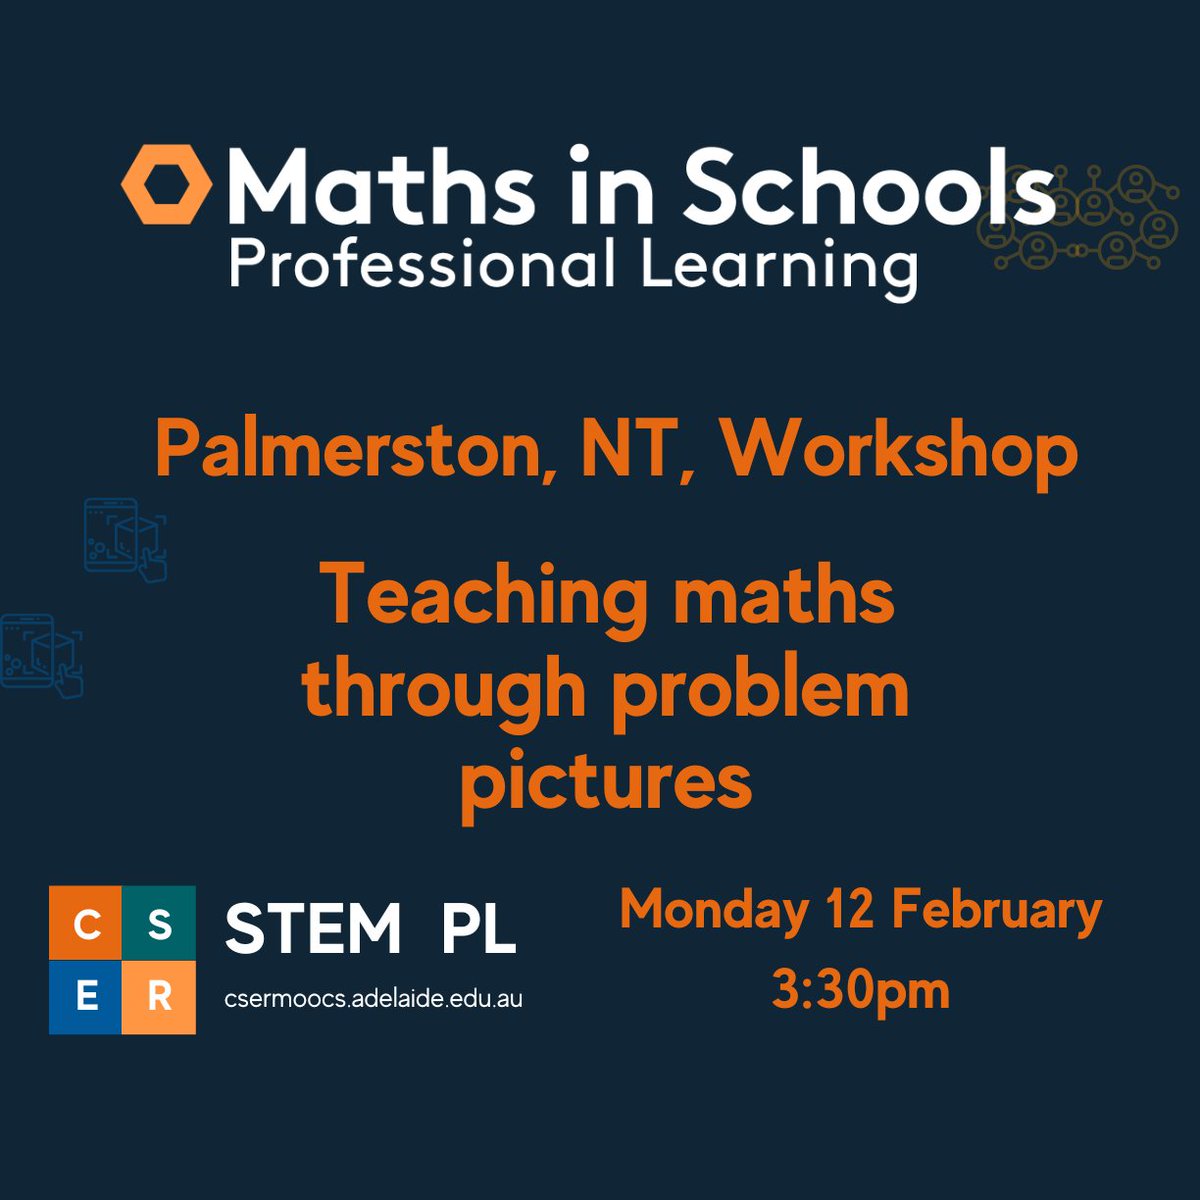 A shoutout to our #maths & #outoffield teacher friends in #Darwin, #Palmerston and surrounds. Join us for a series of face to face Maths in Schools Professional Learning workshops each Monday in February. Register free via: bit.ly/Maths_Events_NT #preserviceteachers #csermoocs